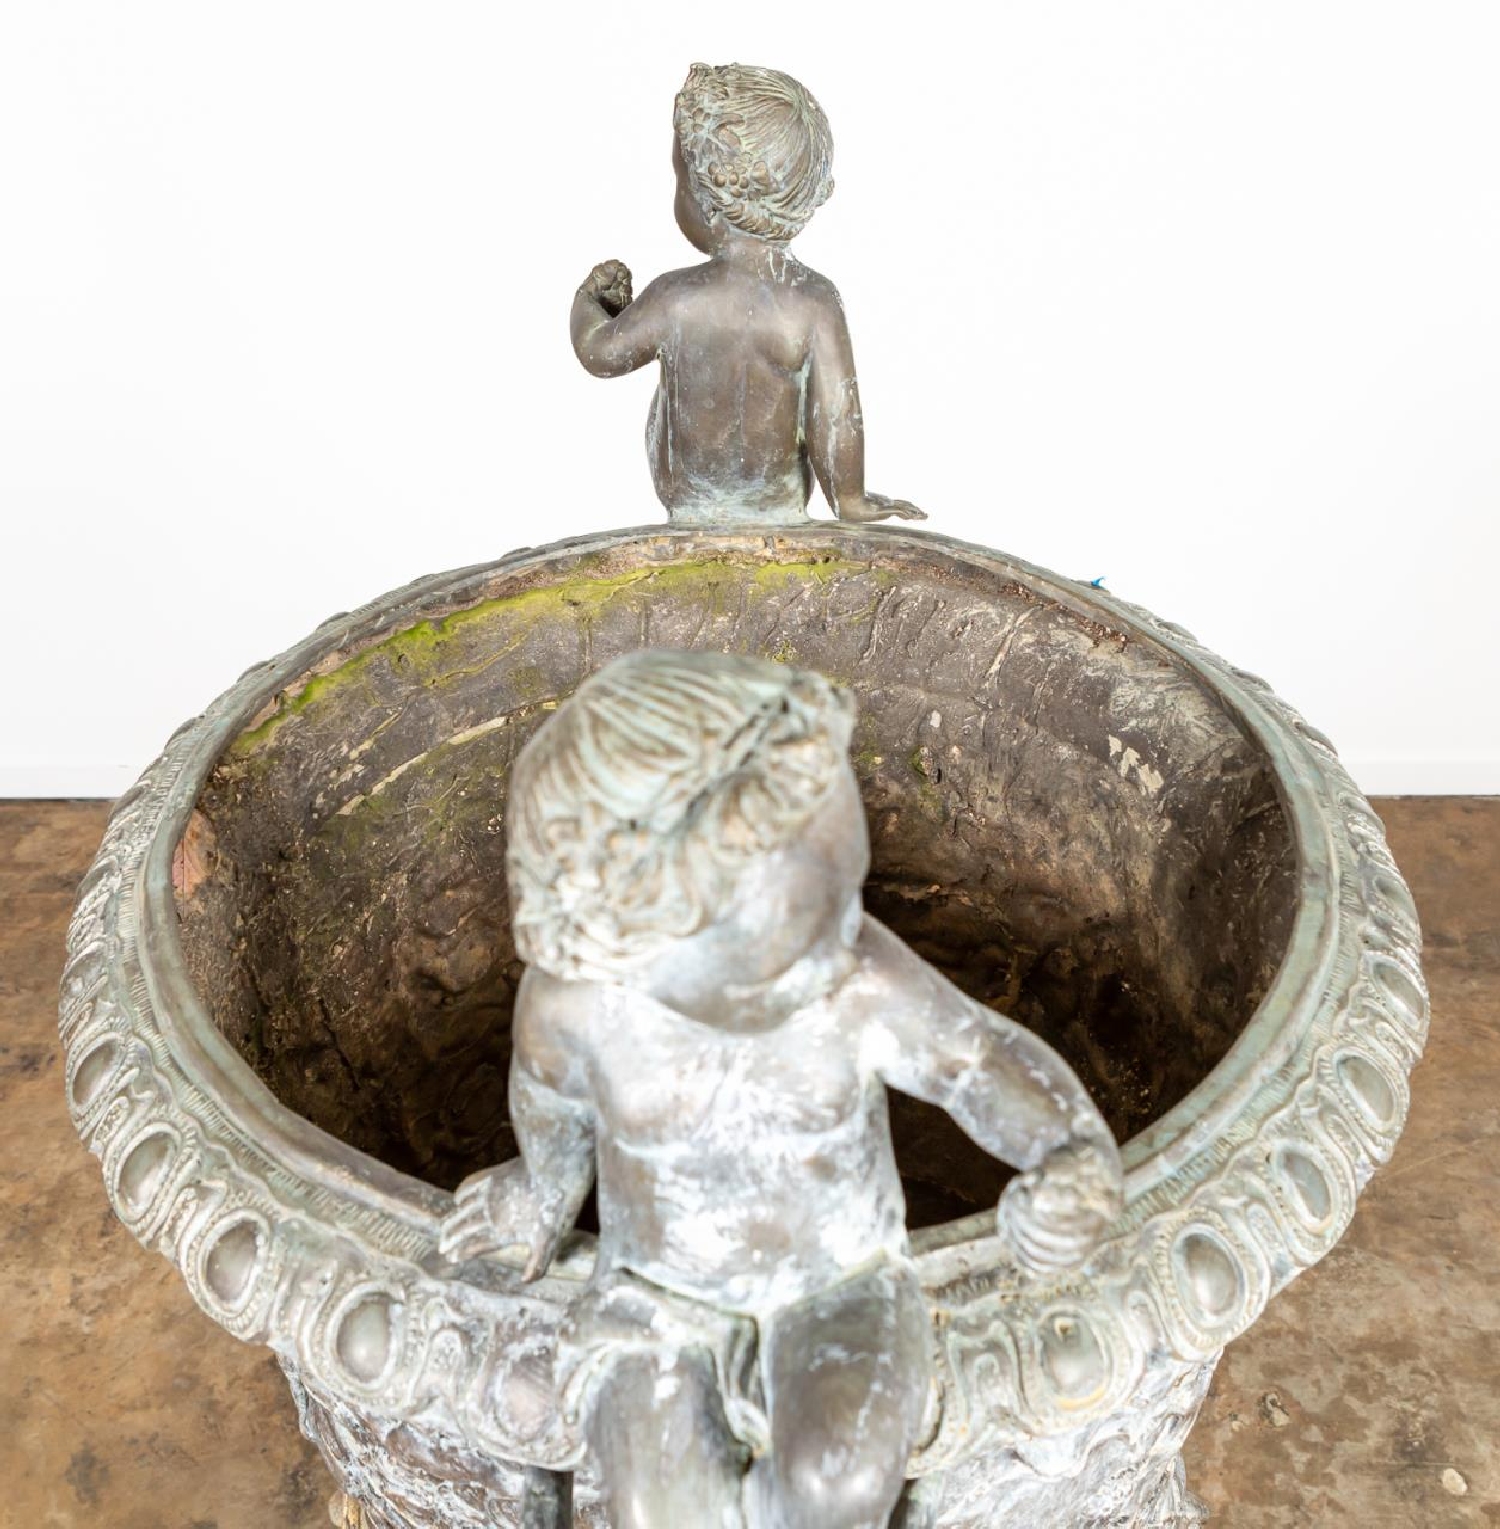 MONUMENTAL CONTINENTAL LEAD GARDEN URN ON STAND - Image 6 of 8